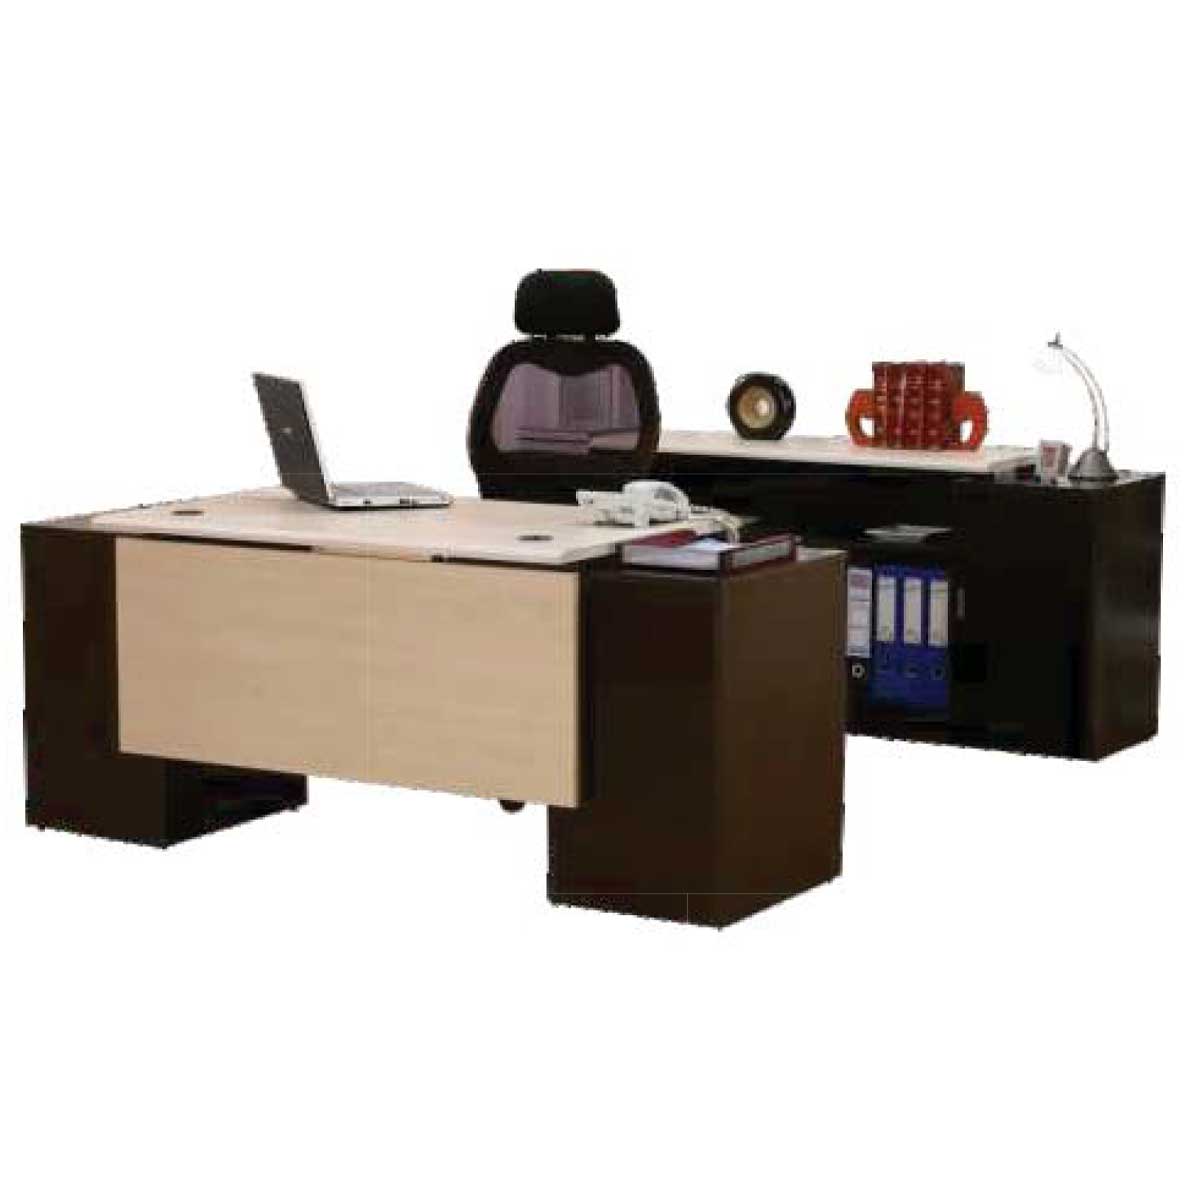 Executive Office Table Manufacturers, Suppliers in Noida Sector 49